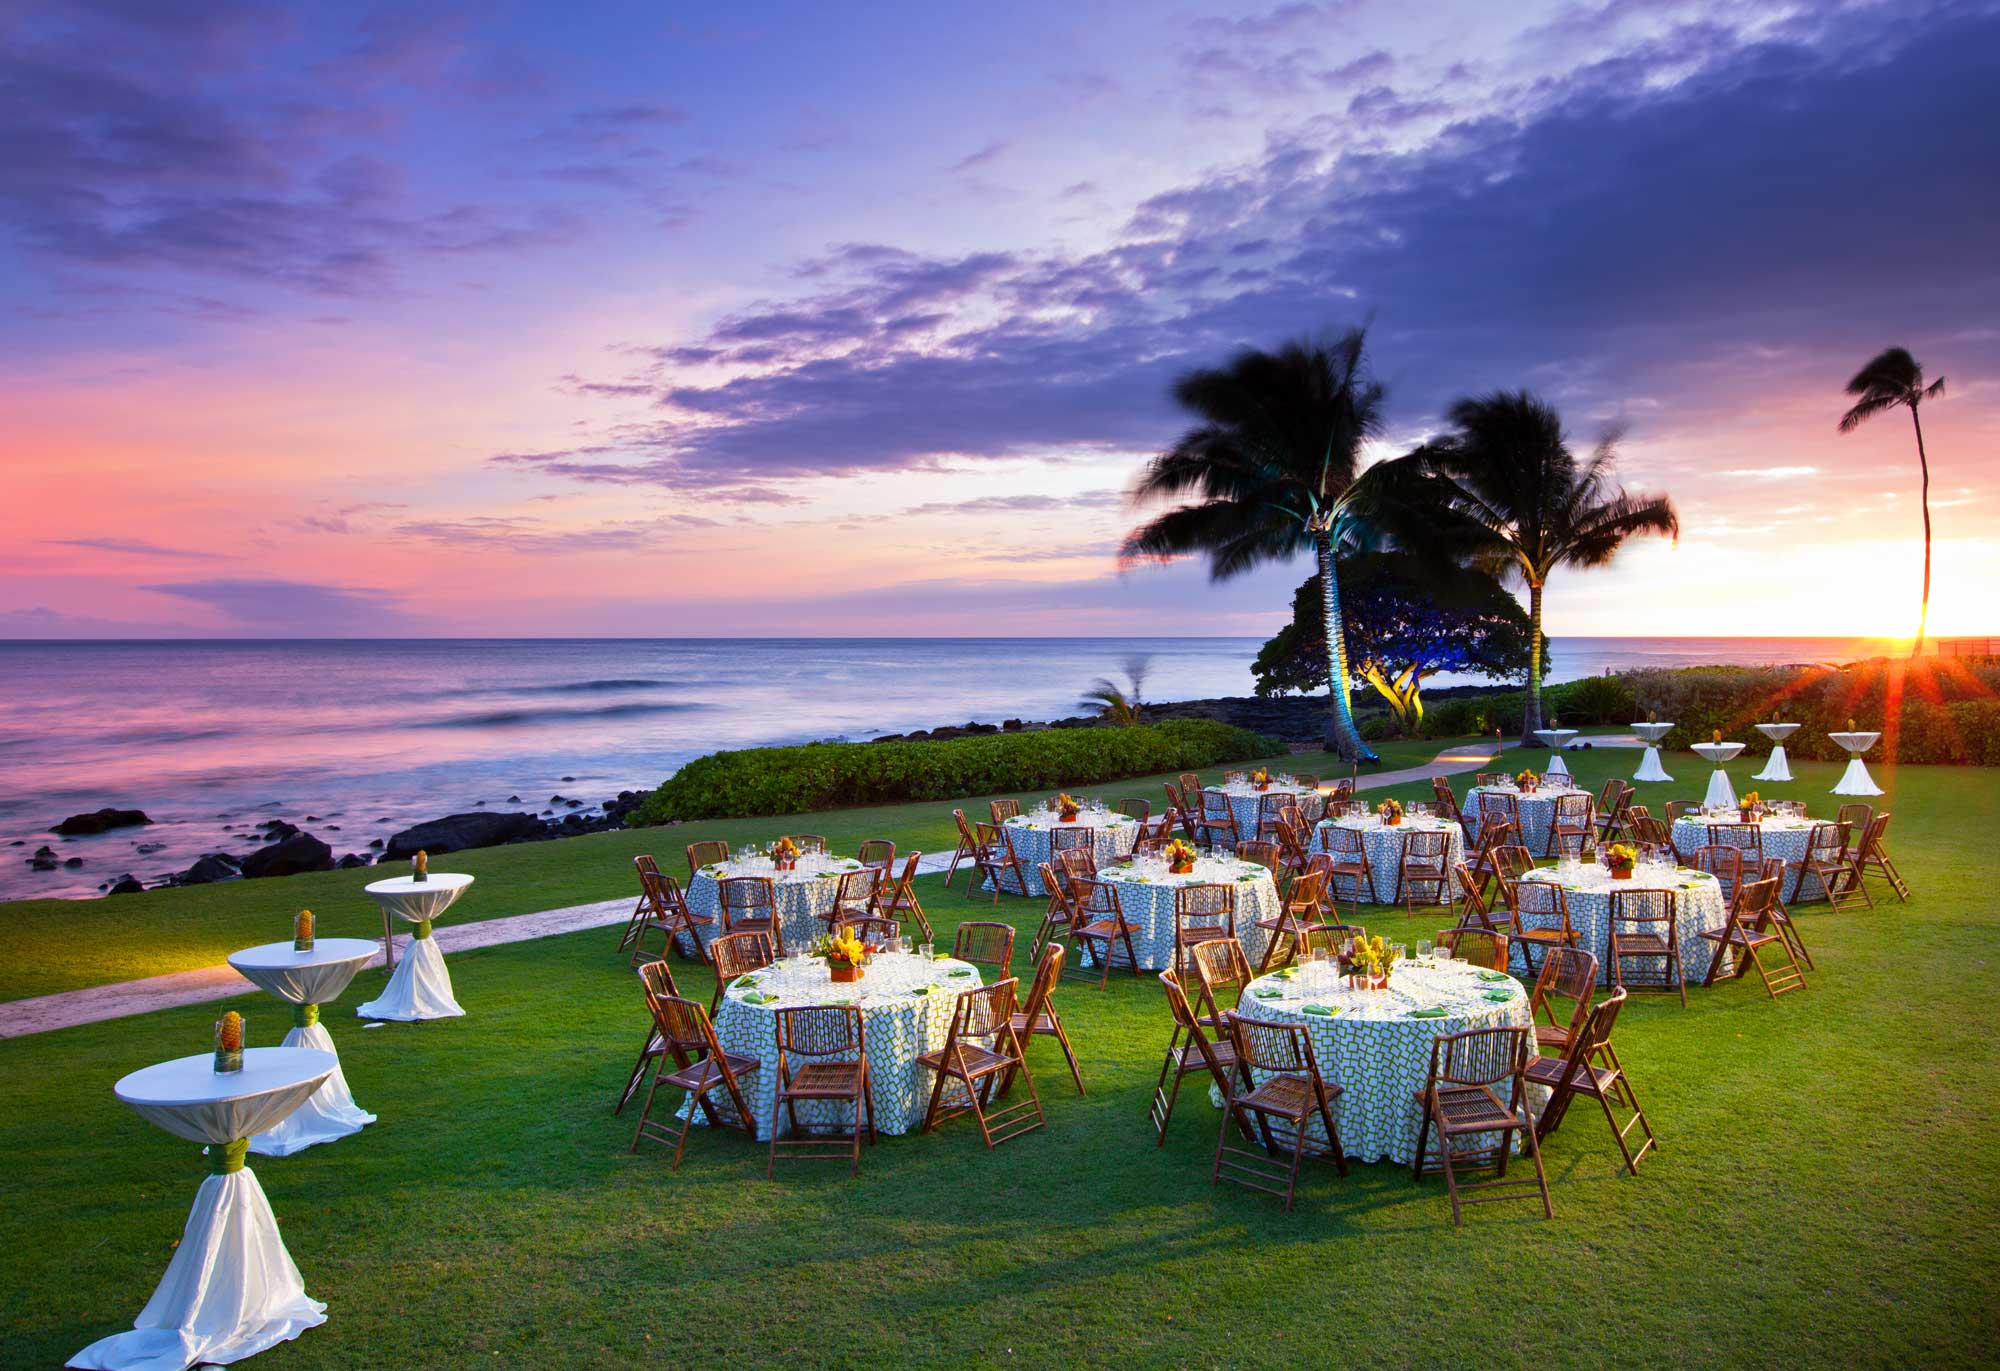 Destination Weddings Venues With Best Views | Unique Places to Get Married | Best Wedding Resorts | Sheraton Kauai